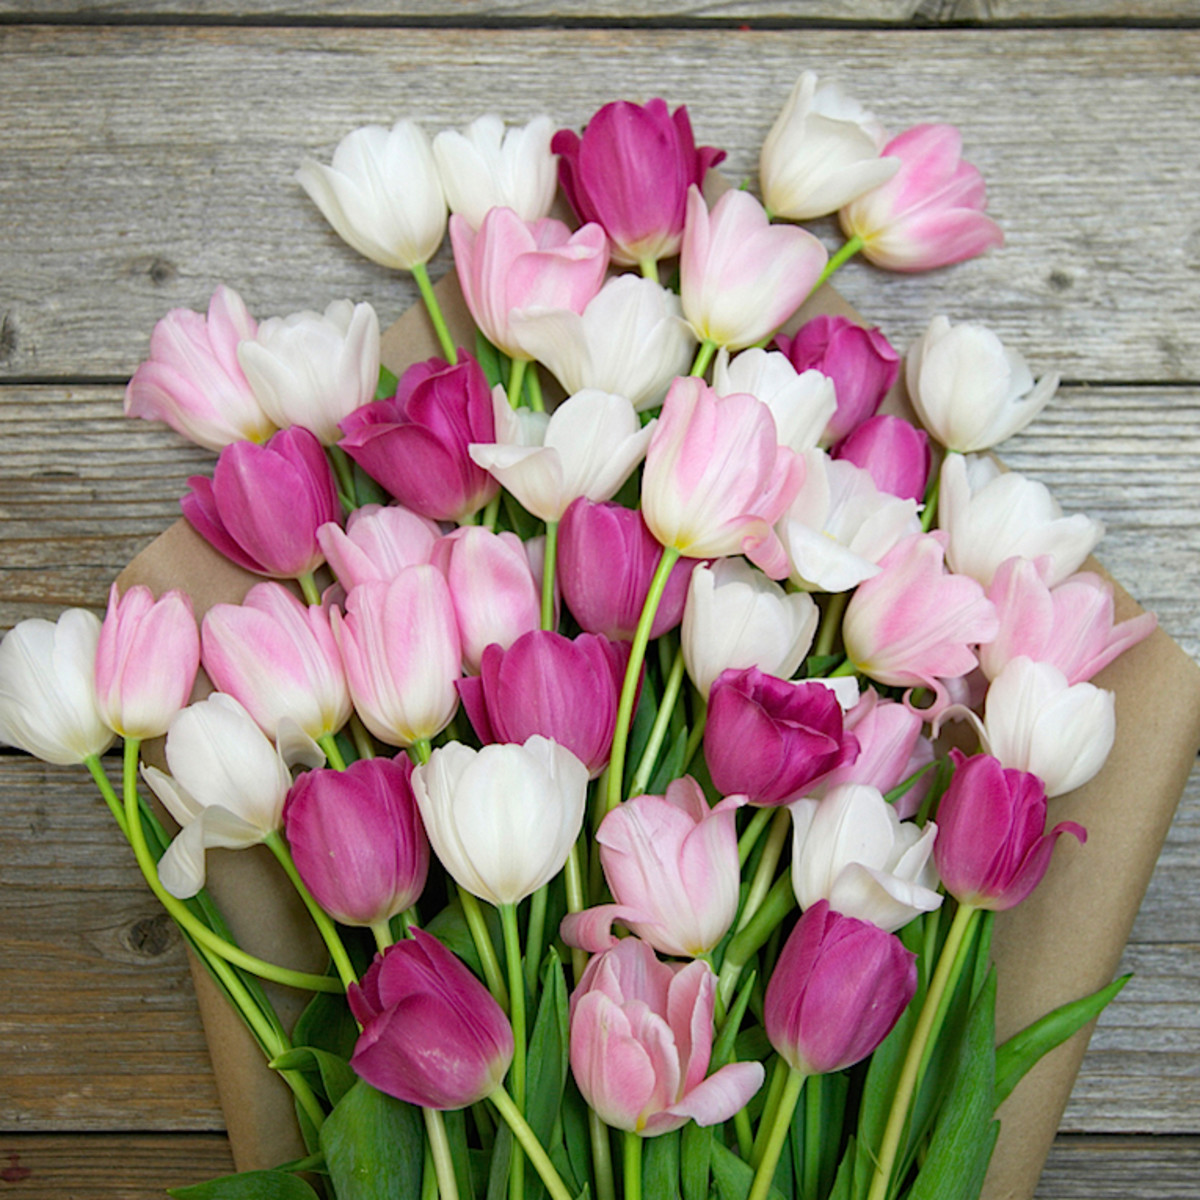 The Bouquet of Tulips